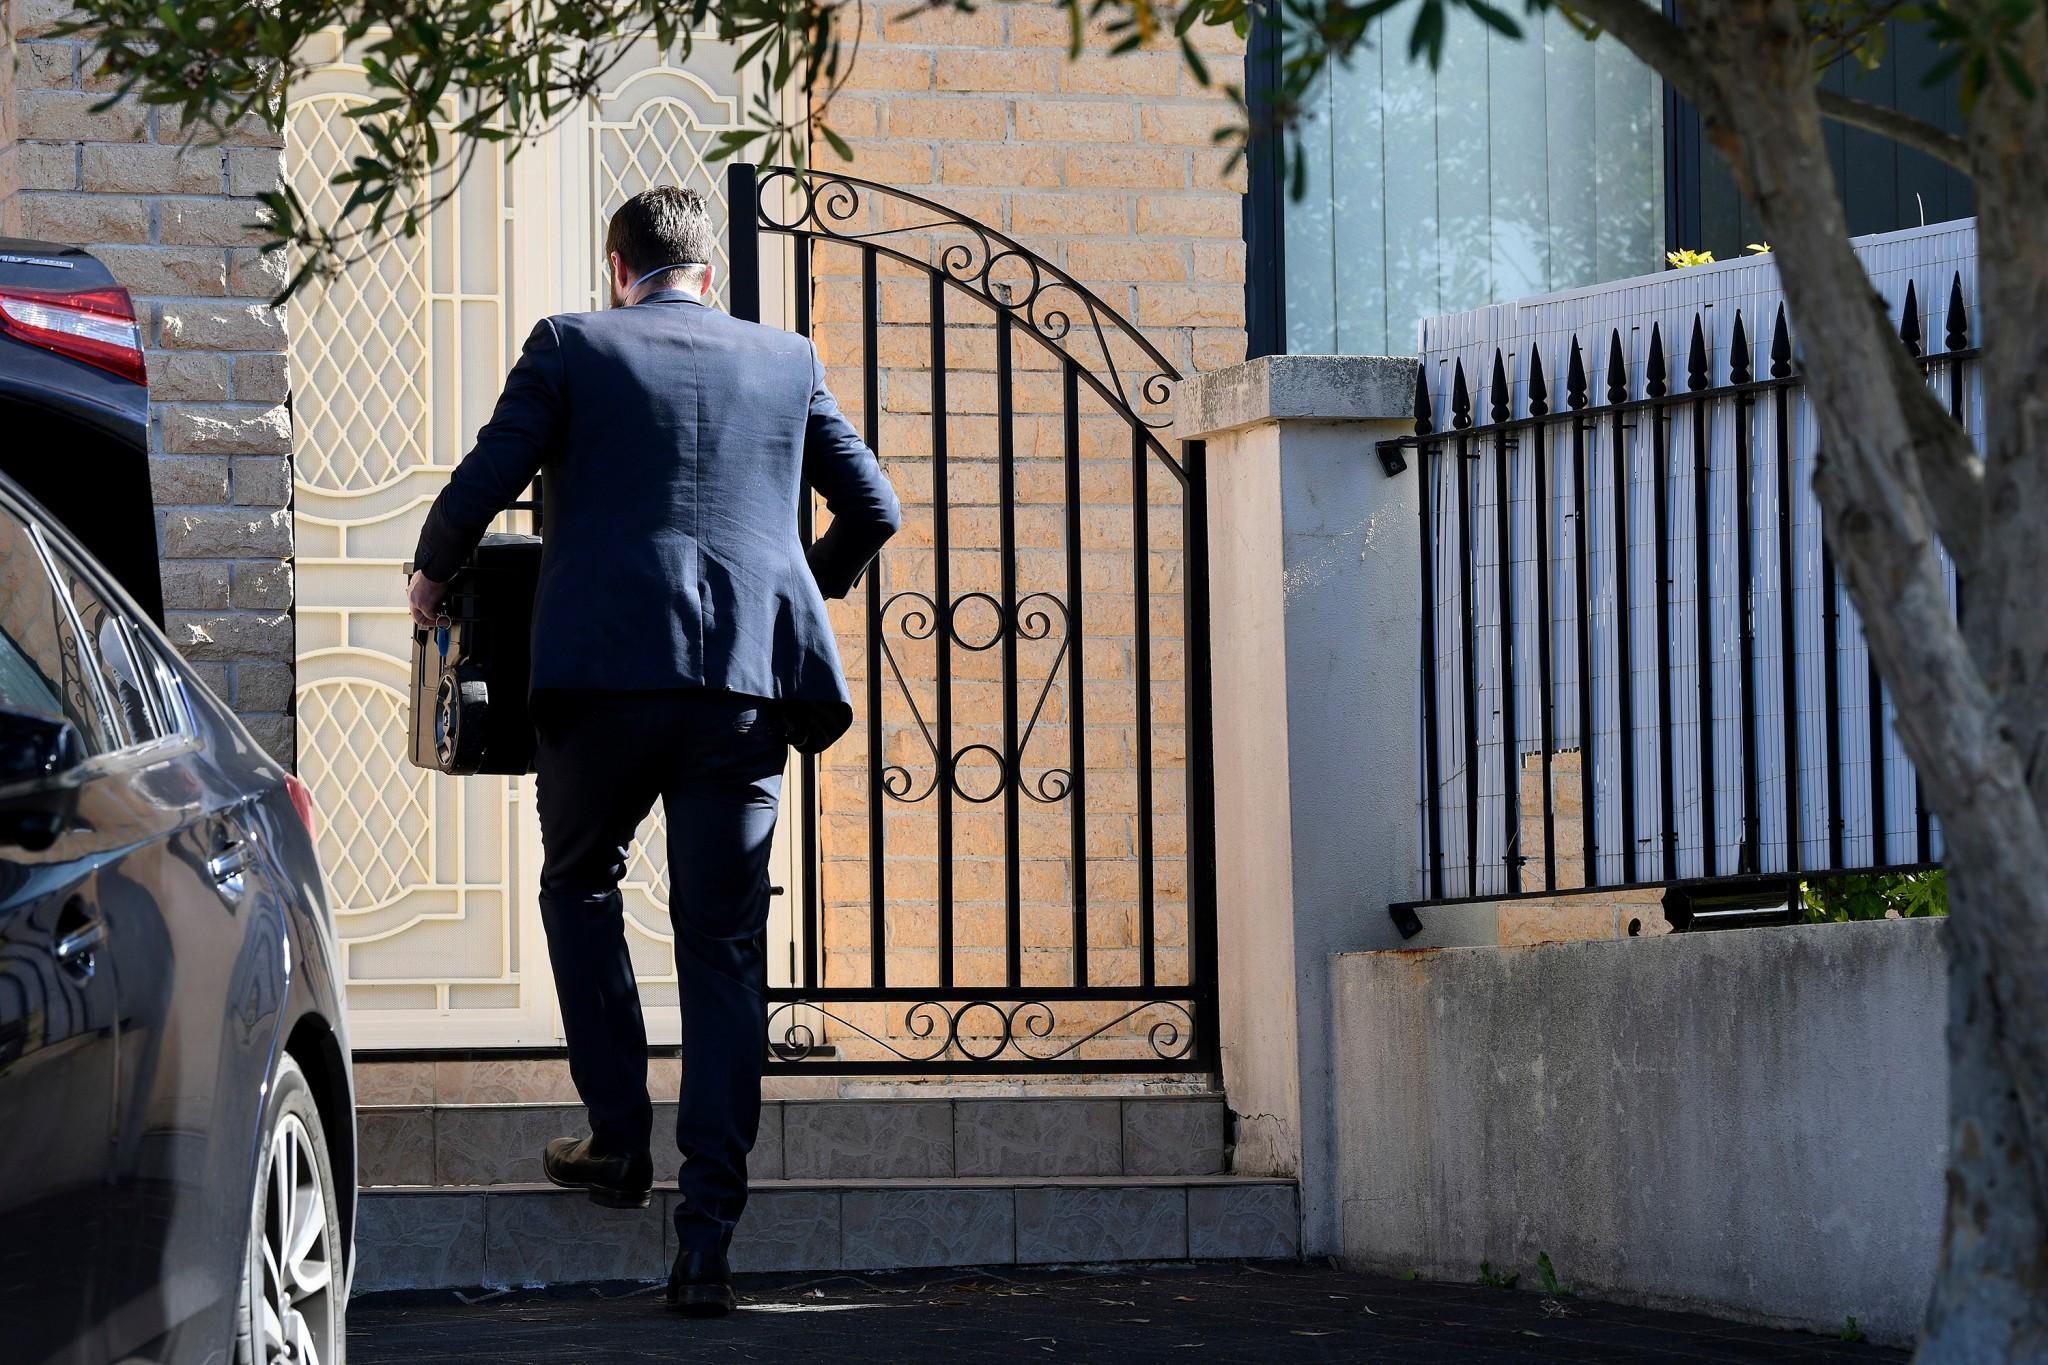 A federal officer enters the home of New South Wales state MP Shaoquett Moselmane in Sydney on Friday after he was suspended from his party and his home was searched in an investigation of alleged influence by China